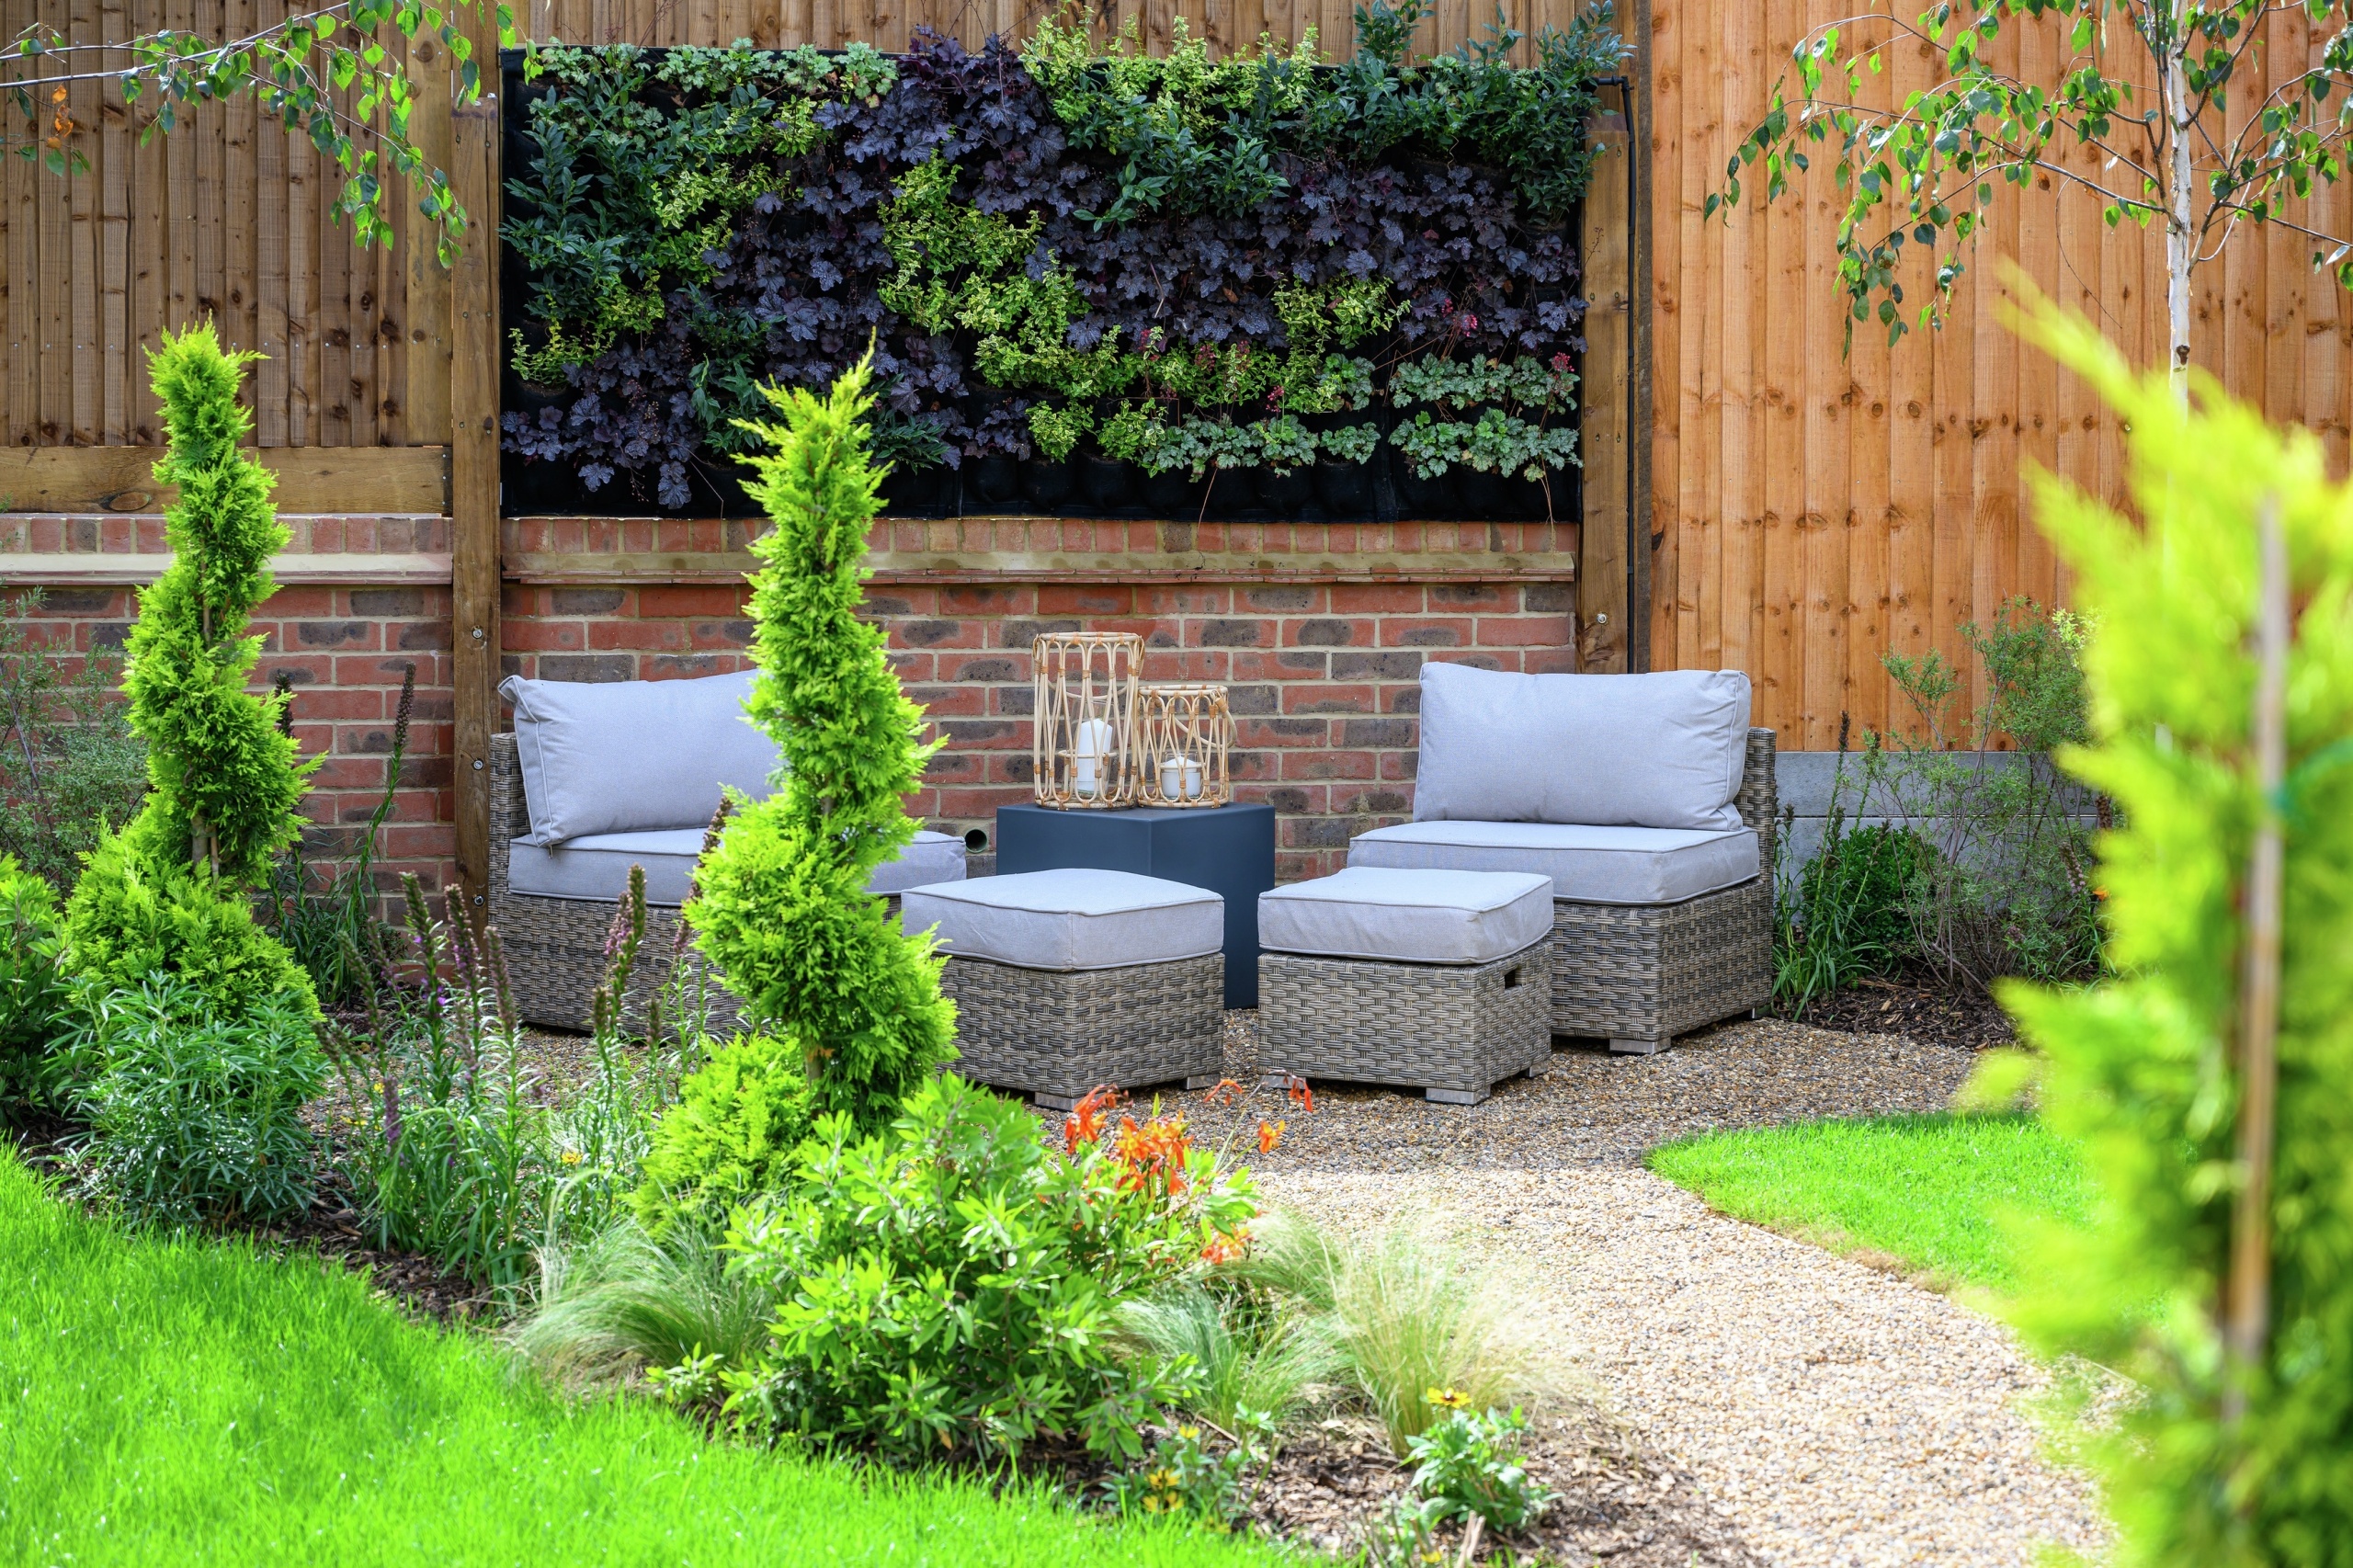 A outdoor space with two chairs and lots of green plants and bushes